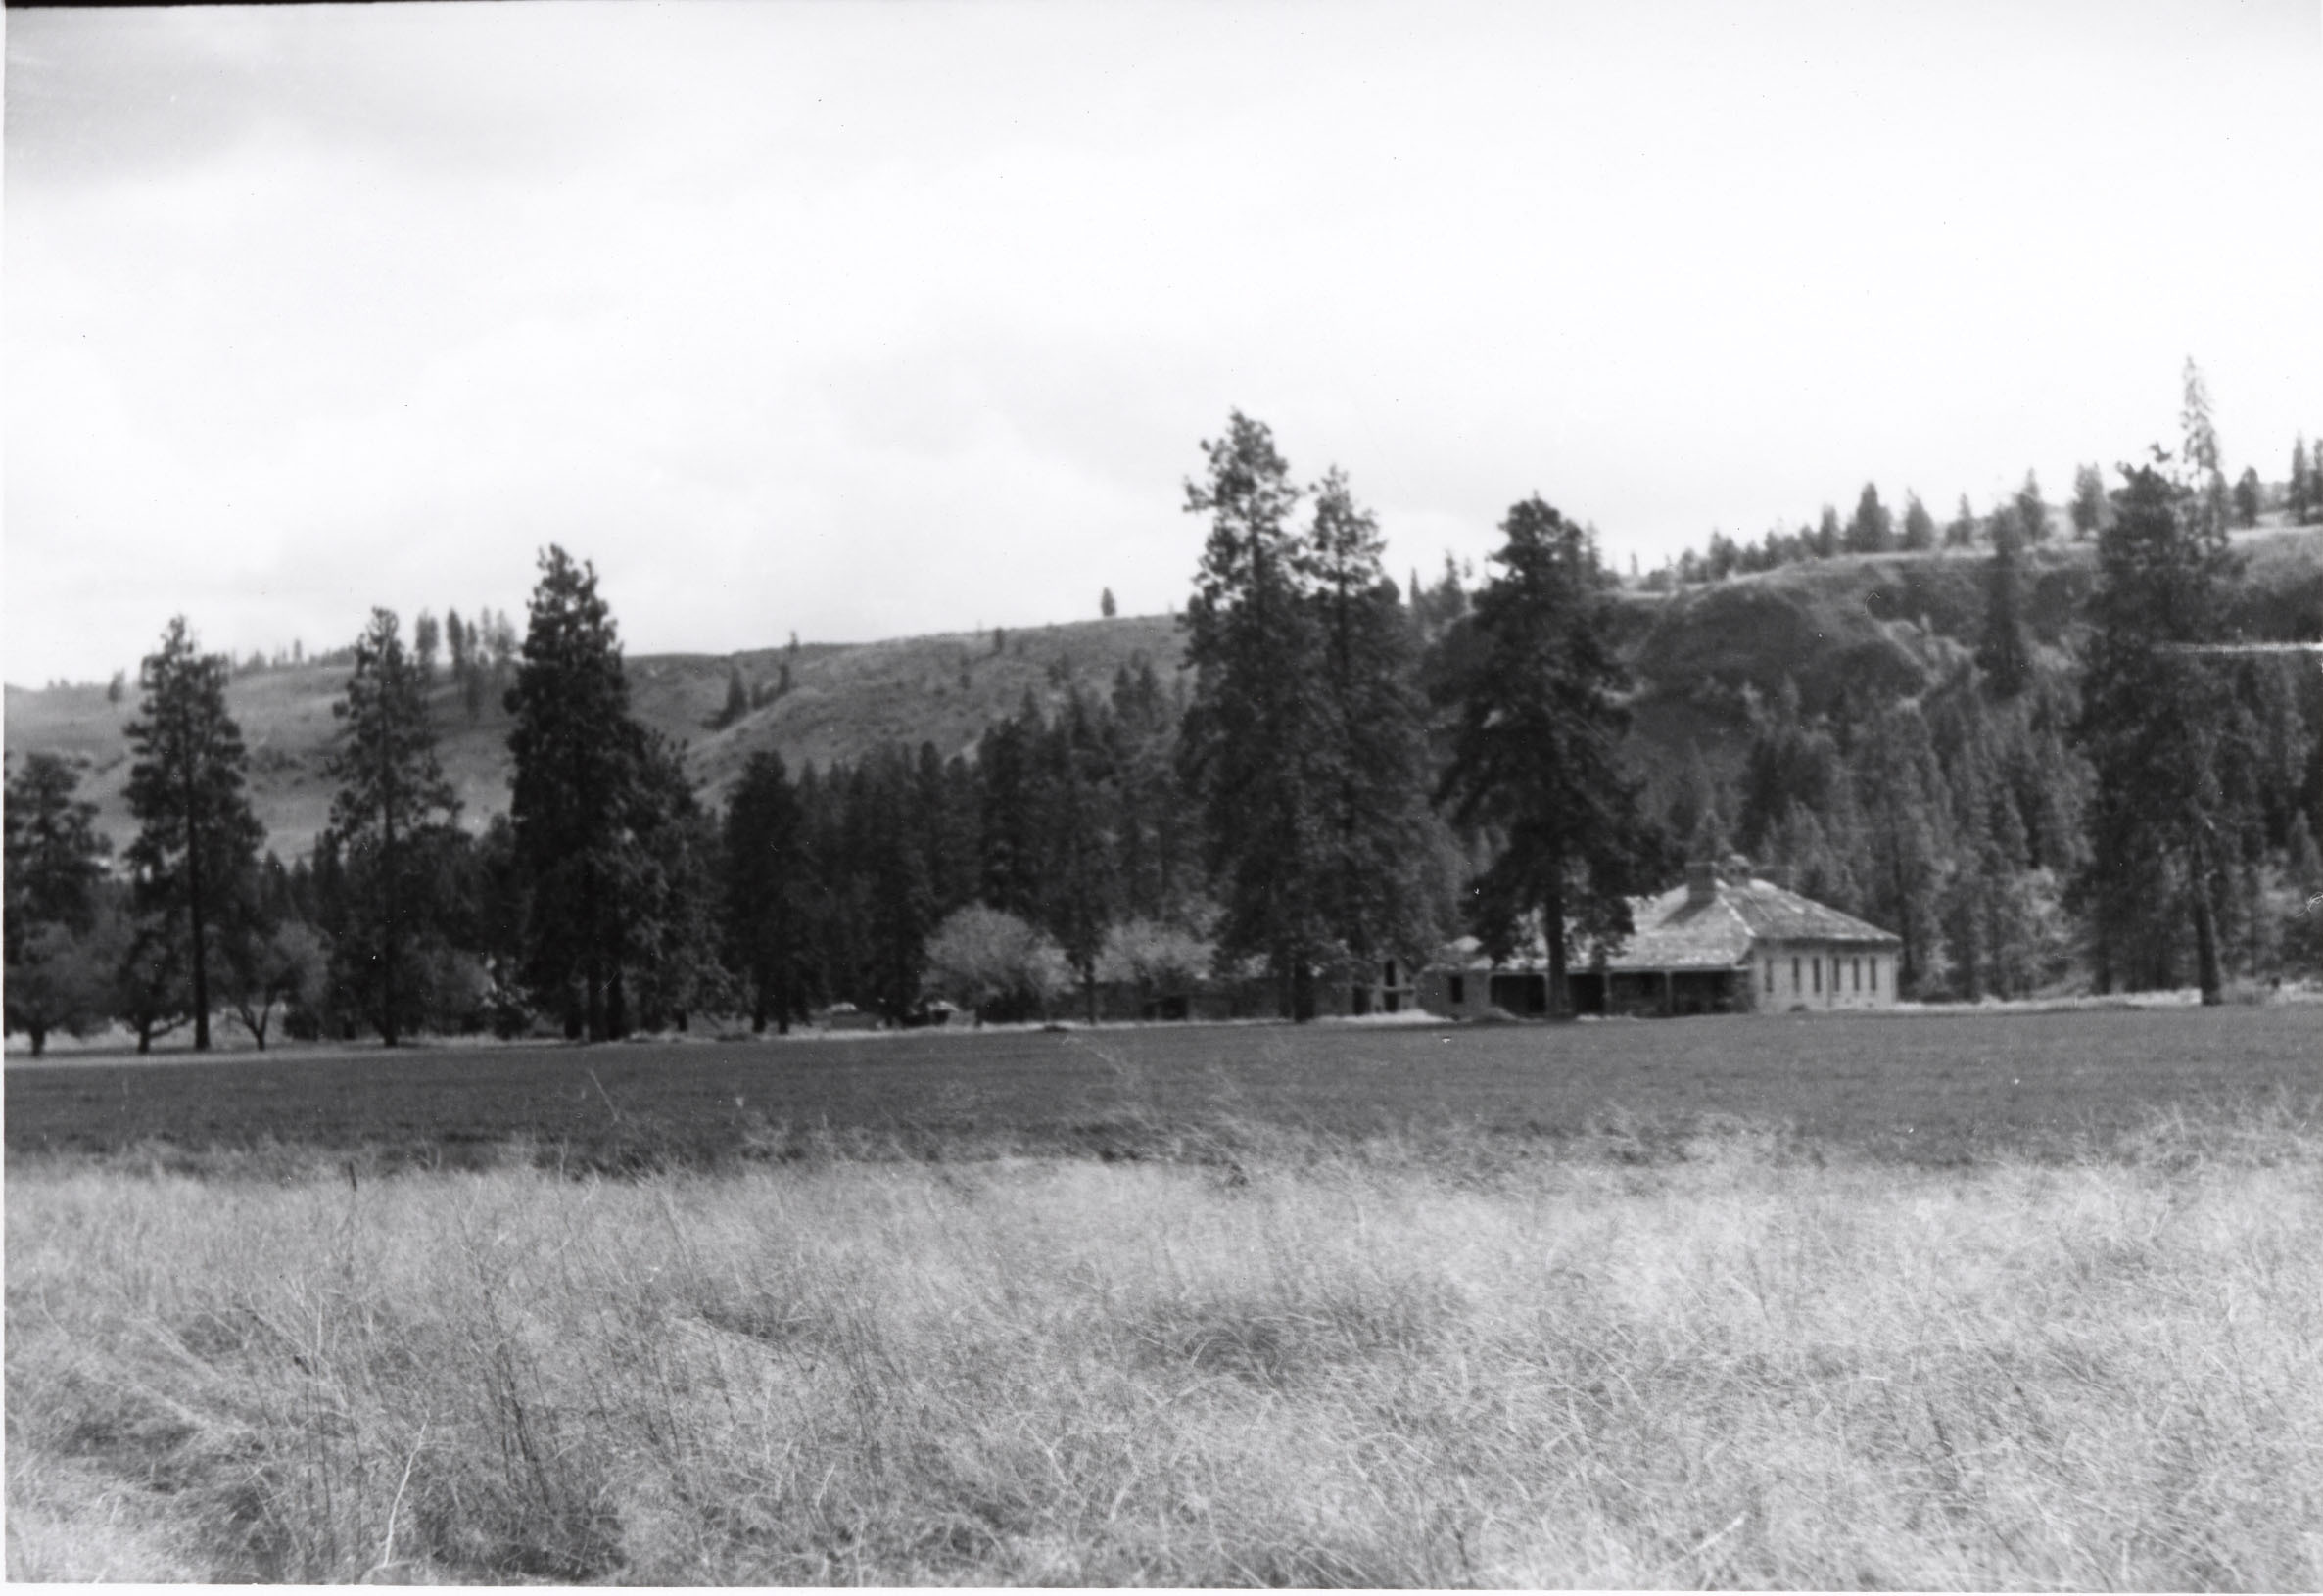 Black and white photograph of a field, trees, and a building